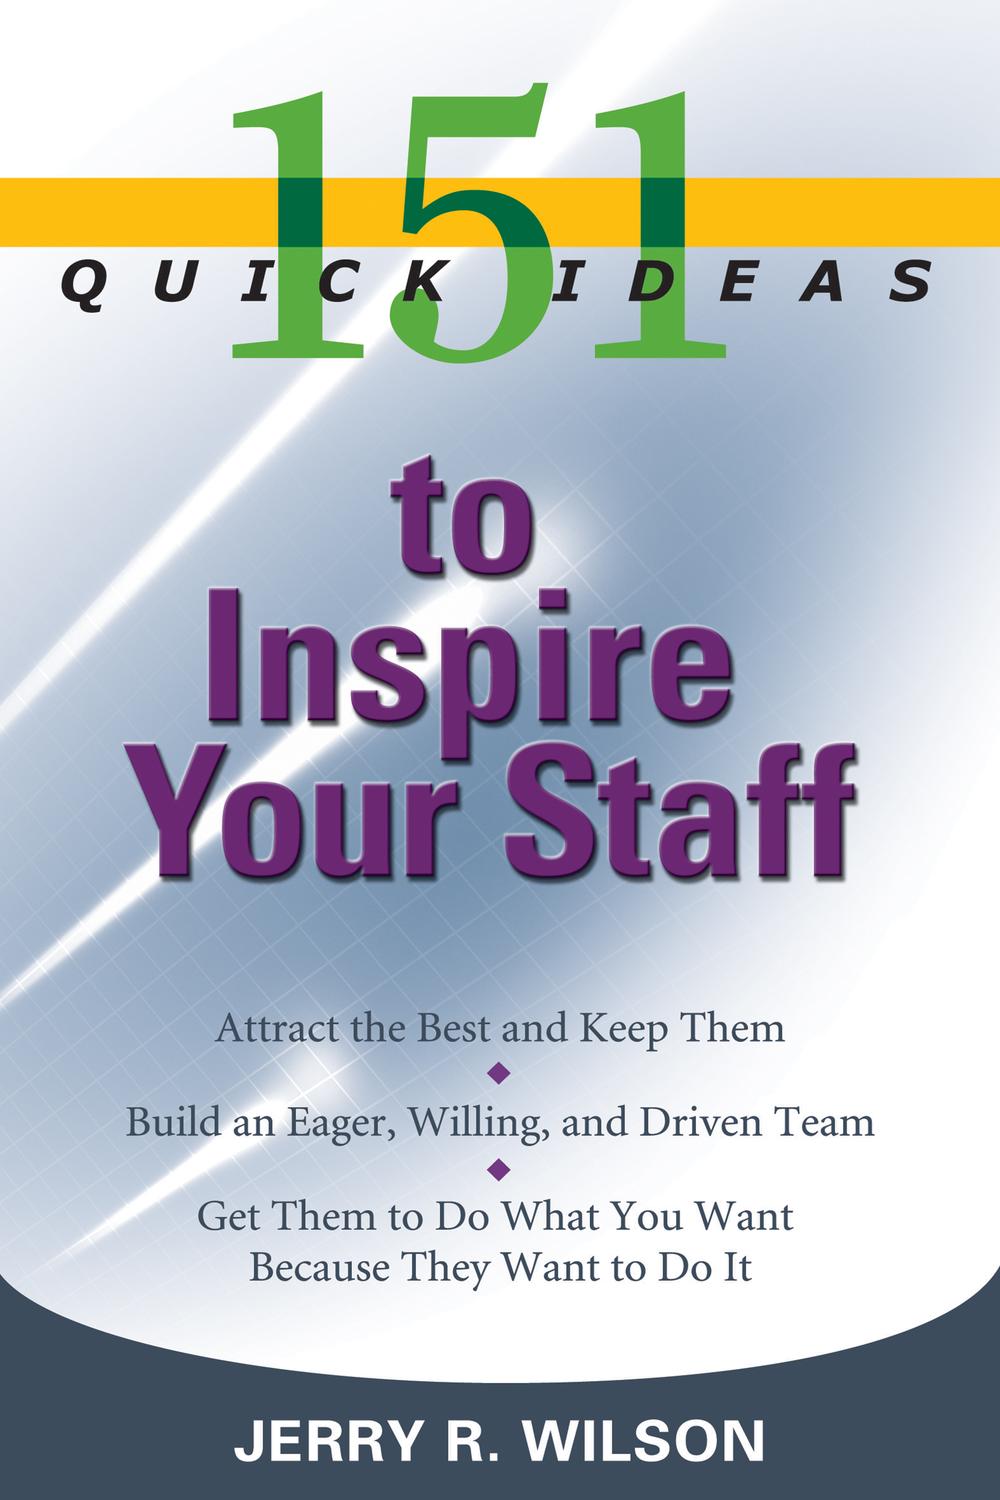 151 Quick Ideas to Inspire Your Staff - Jerry R. Wilson